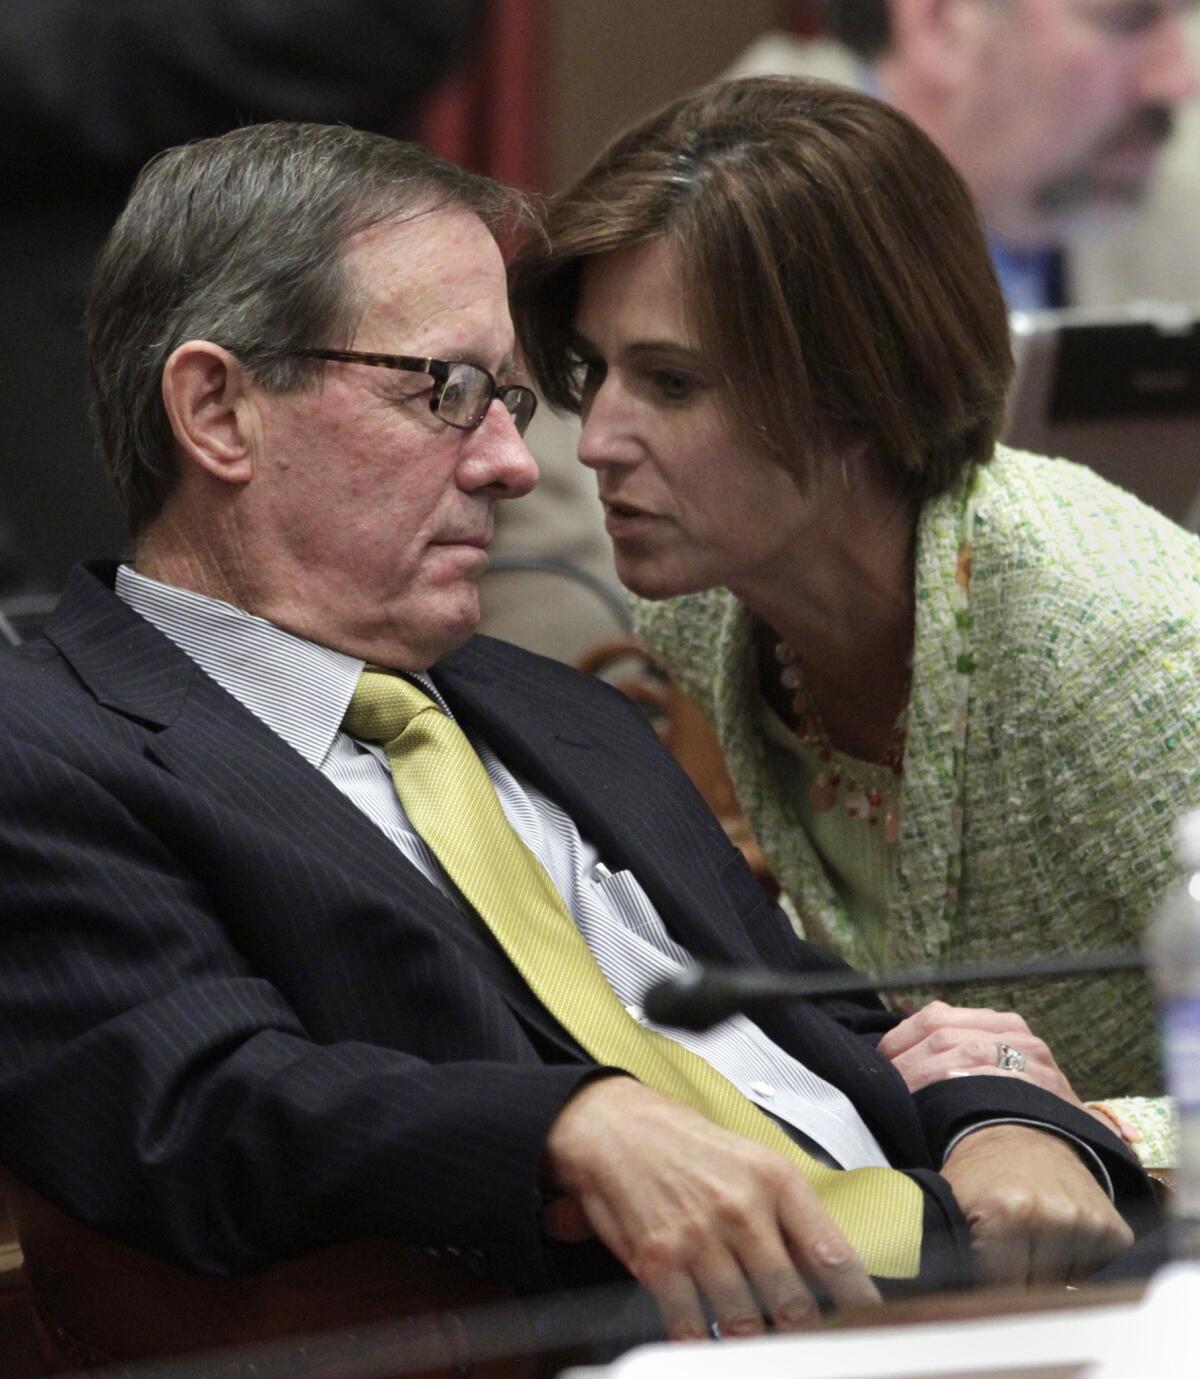 Republican state Sens. Tom Berryhill (R-Modesto) and Mimi Walters (R-Lake Forest)confer during a recent floor debate on the budget. Berryhill faces administrative charges of laundering campaign contributions to his brother.